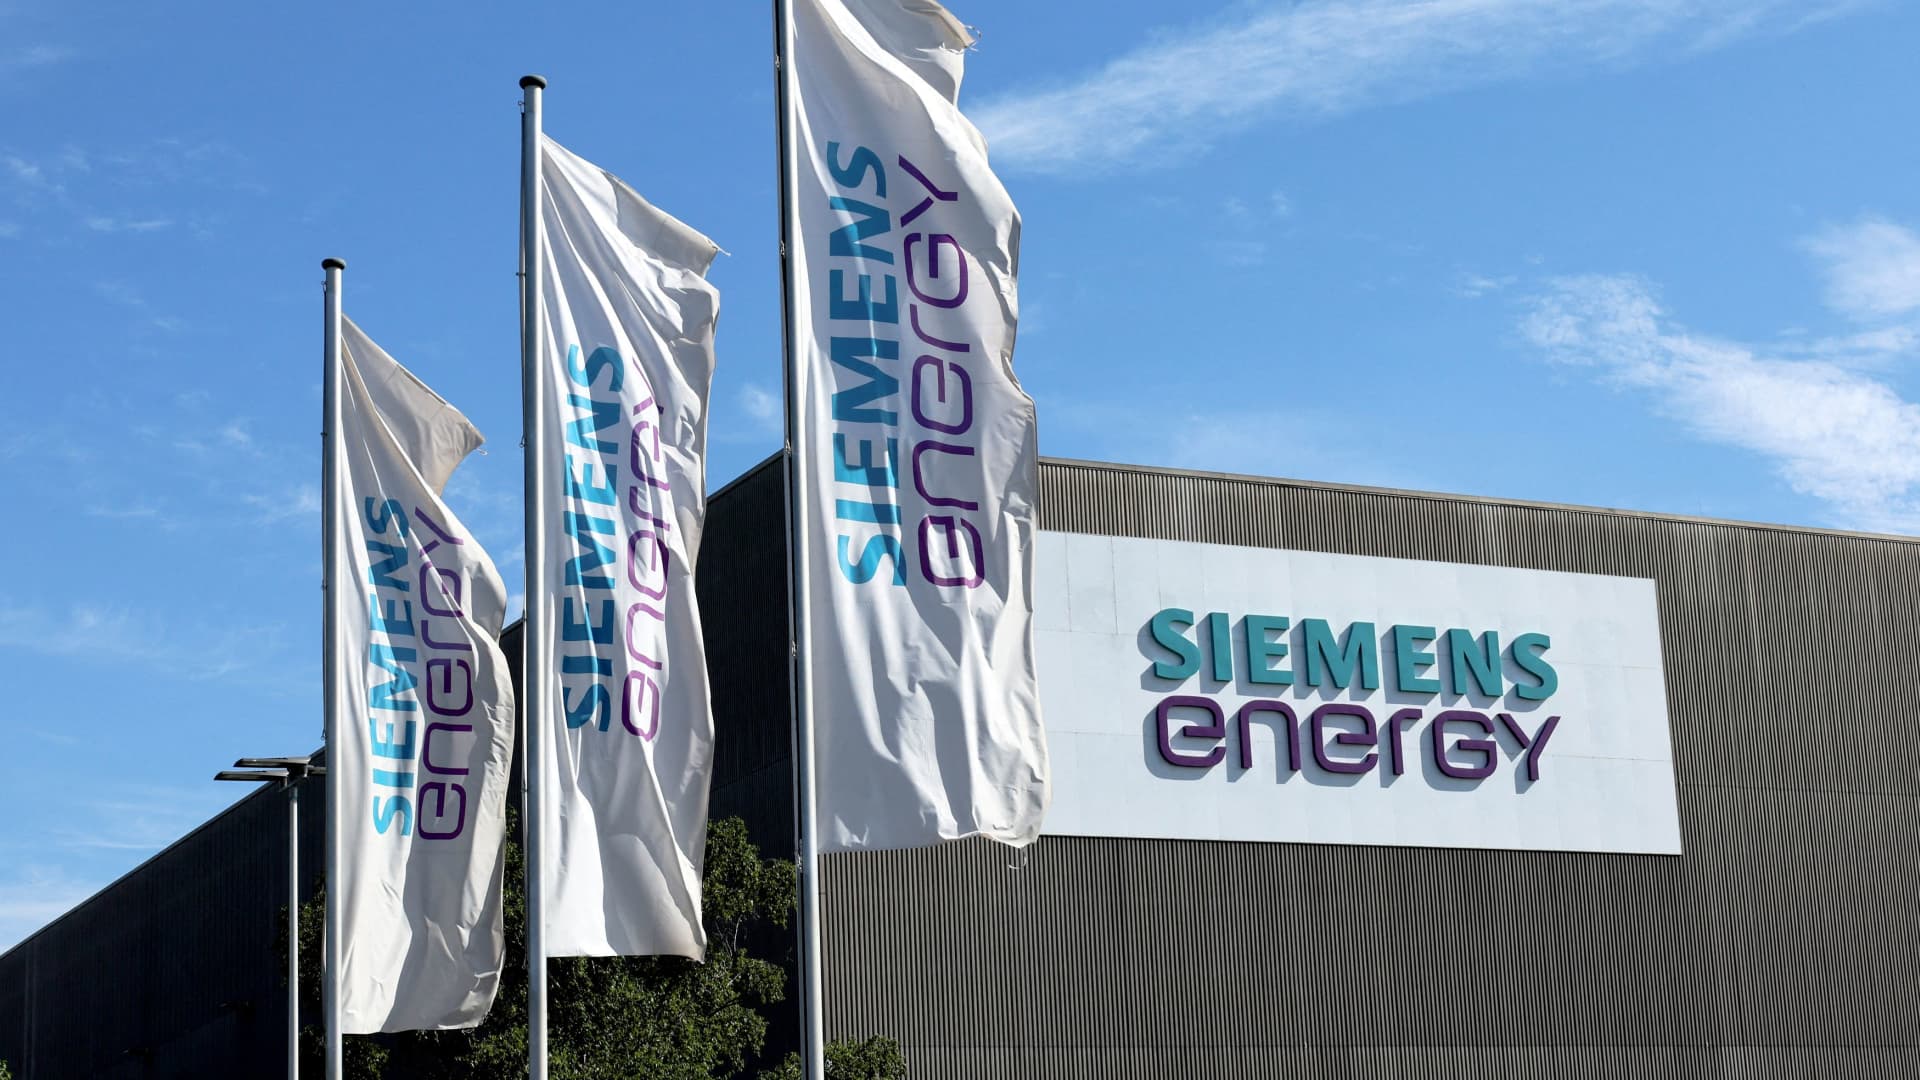 Siemens Energy clinches state guarantees as it posts a 4.6 billion euro annual loss